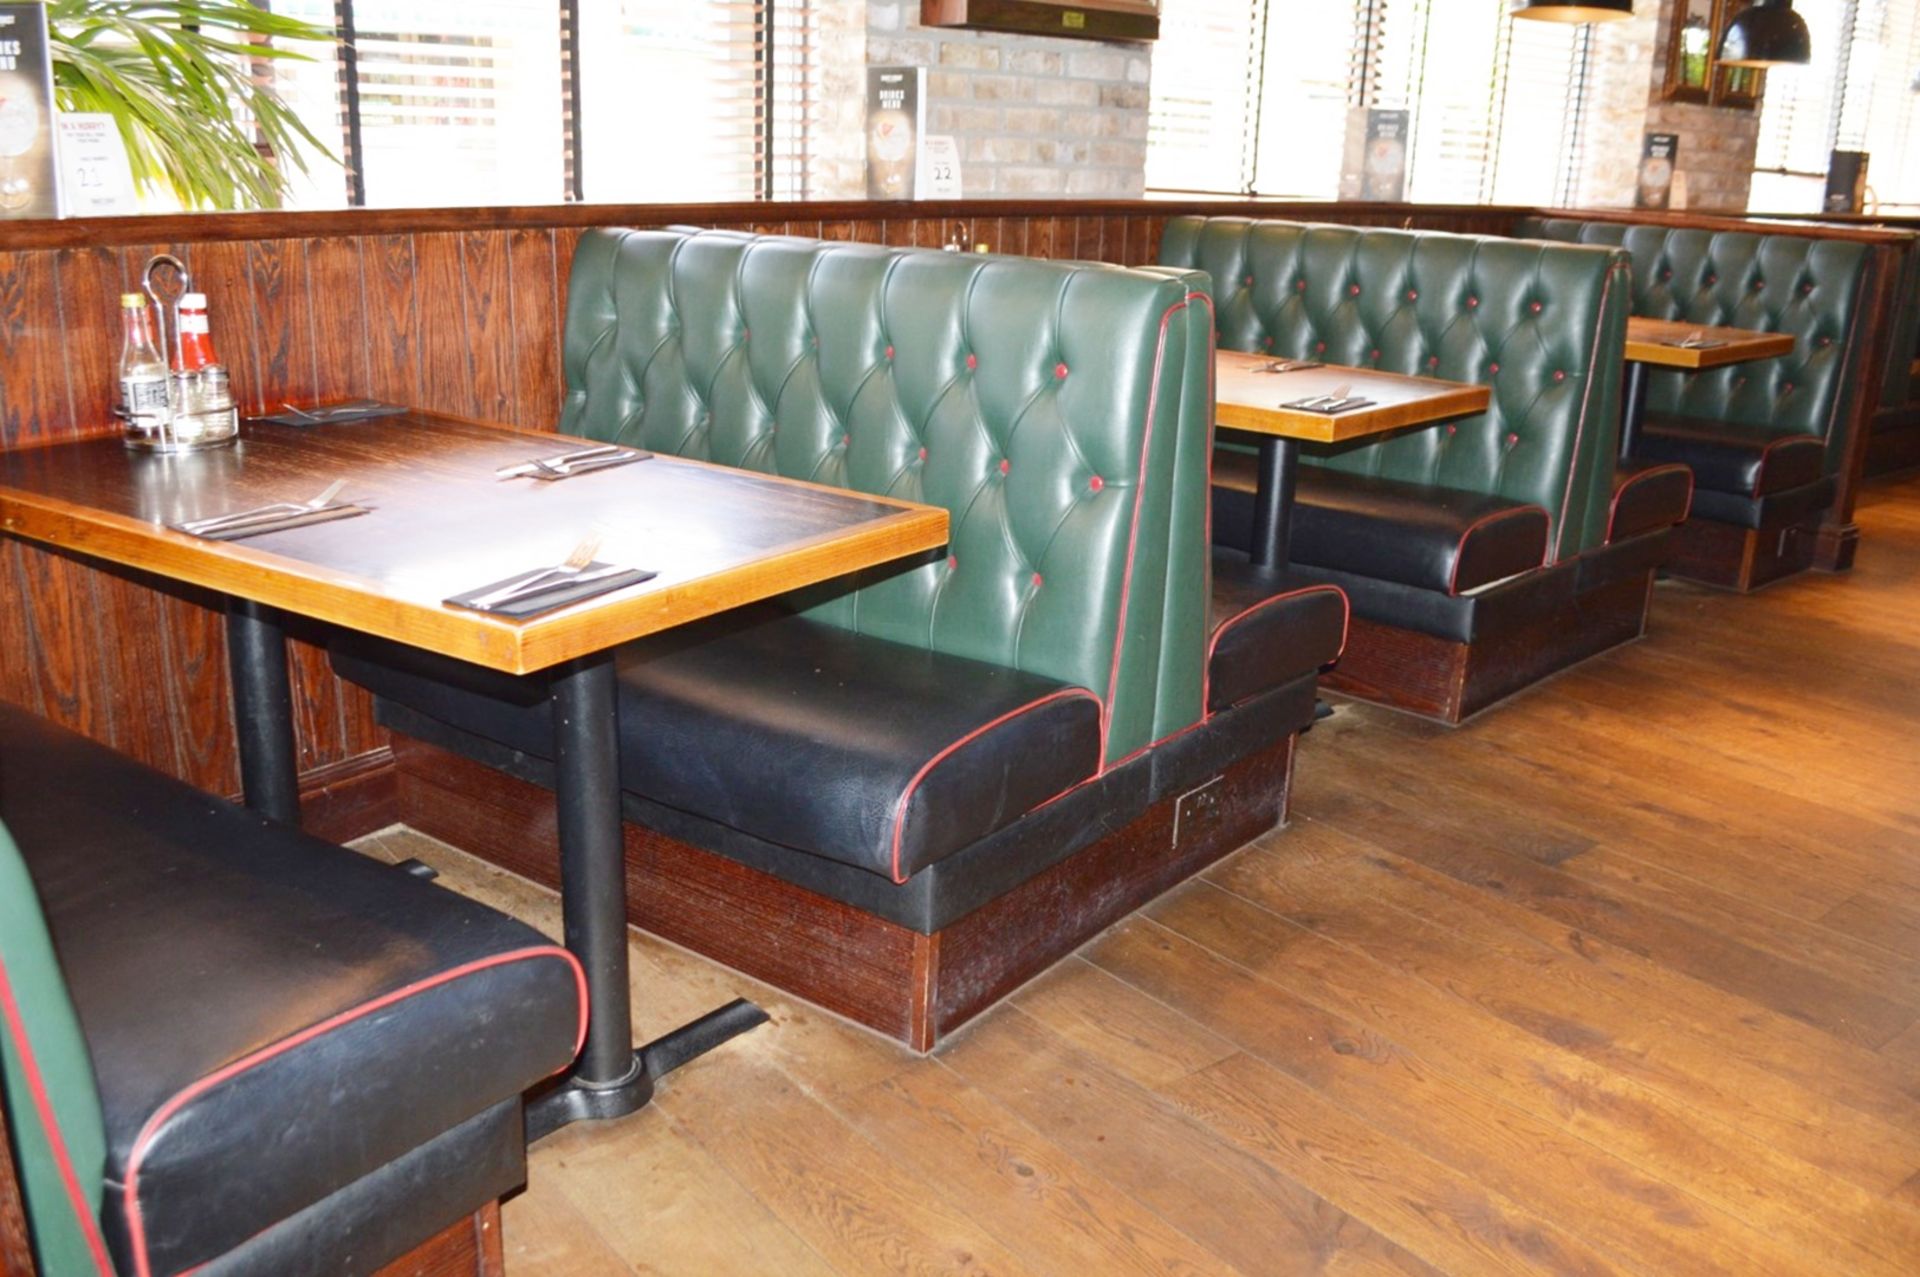 4 x Sections of Restaurant Booth Seating - Include 2 x Double End Seats and 2 x Double Back to